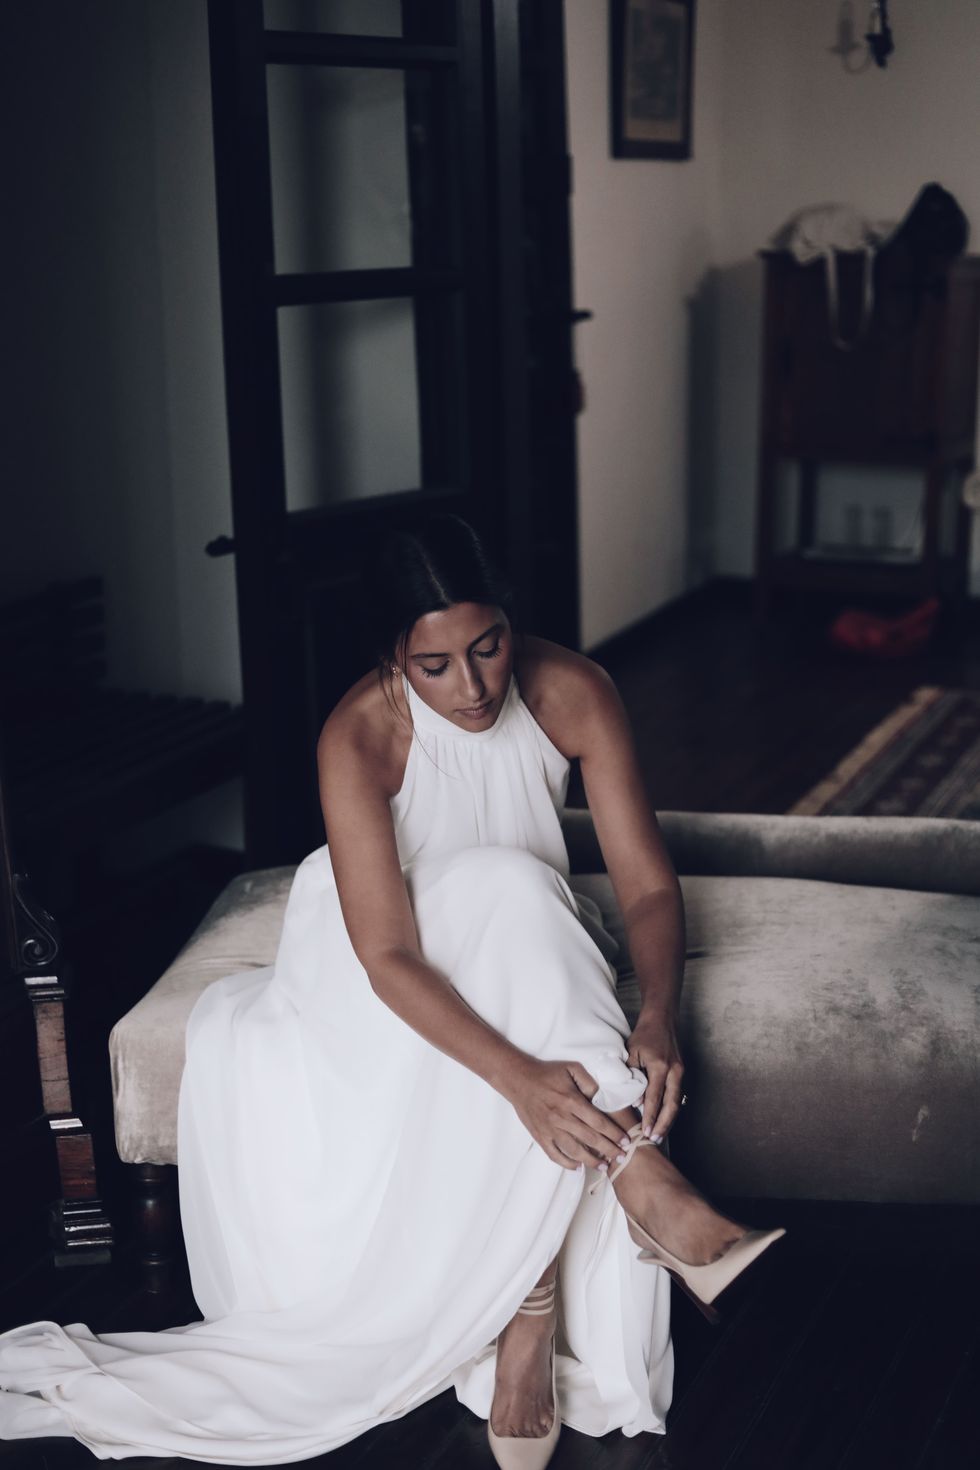 a person in a white dress sitting on a couch